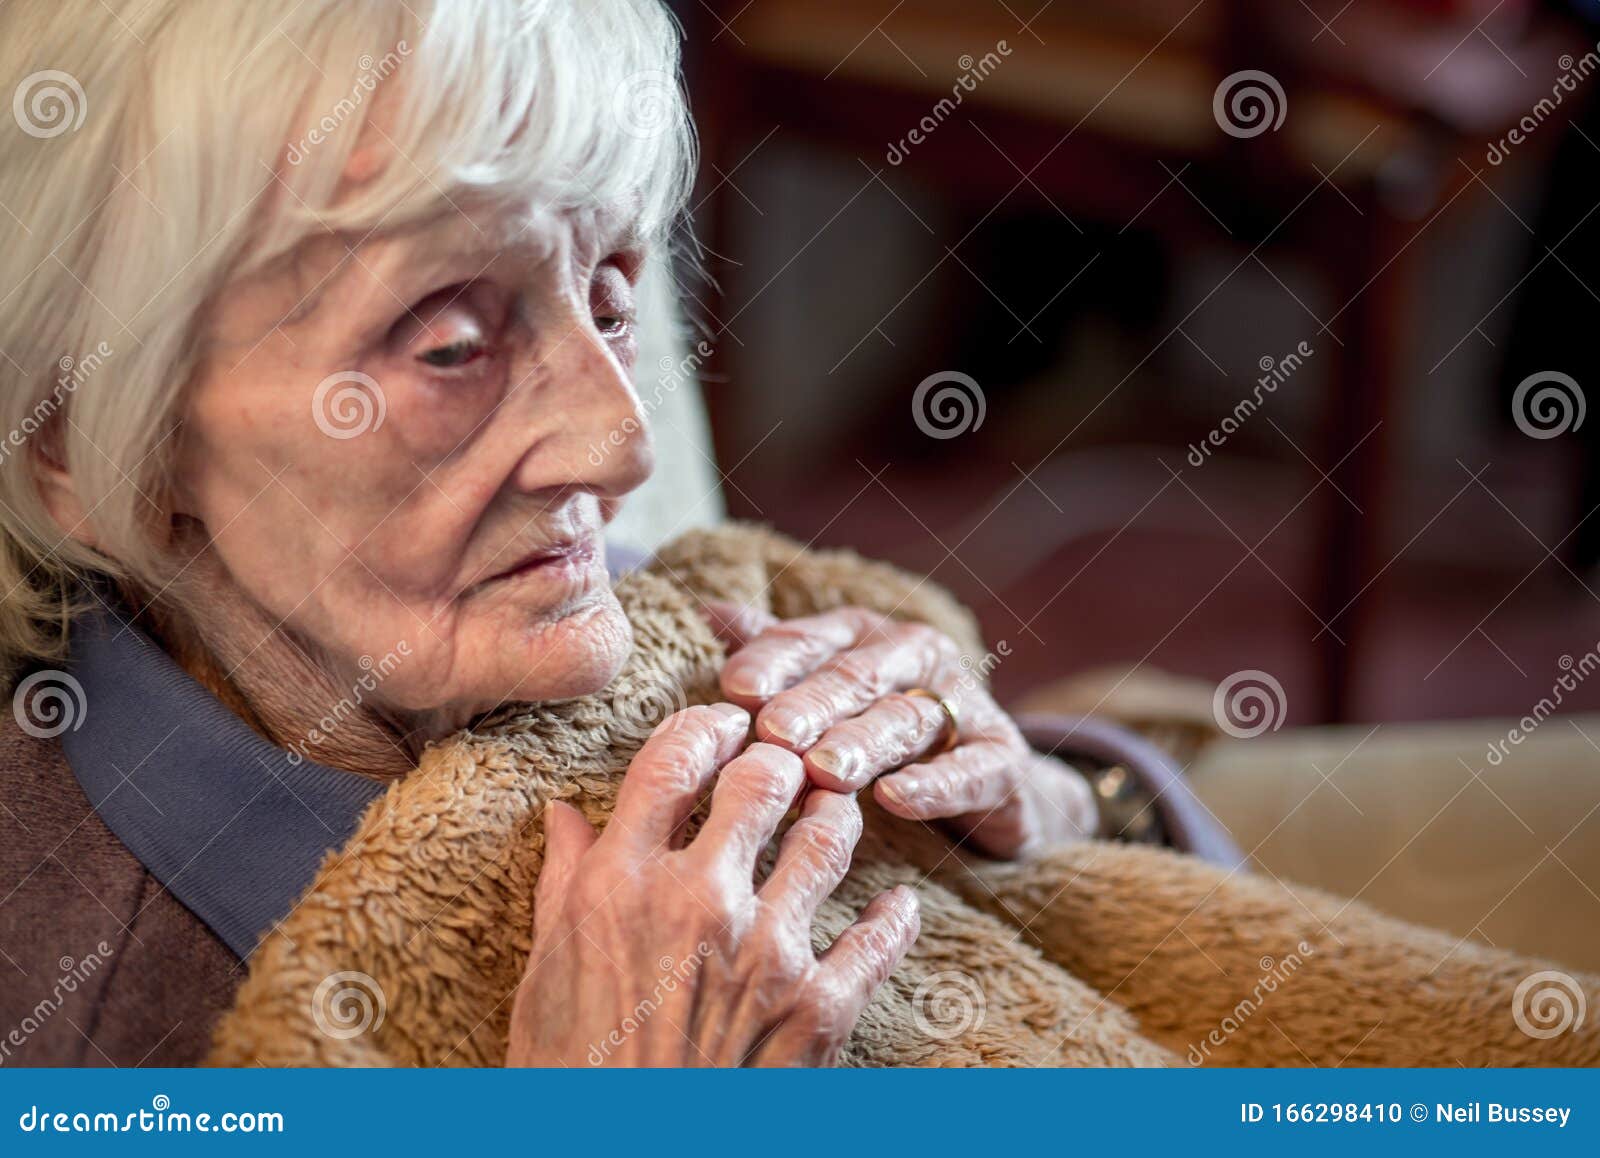 an elderly woman feeling cold at her home during the winter months